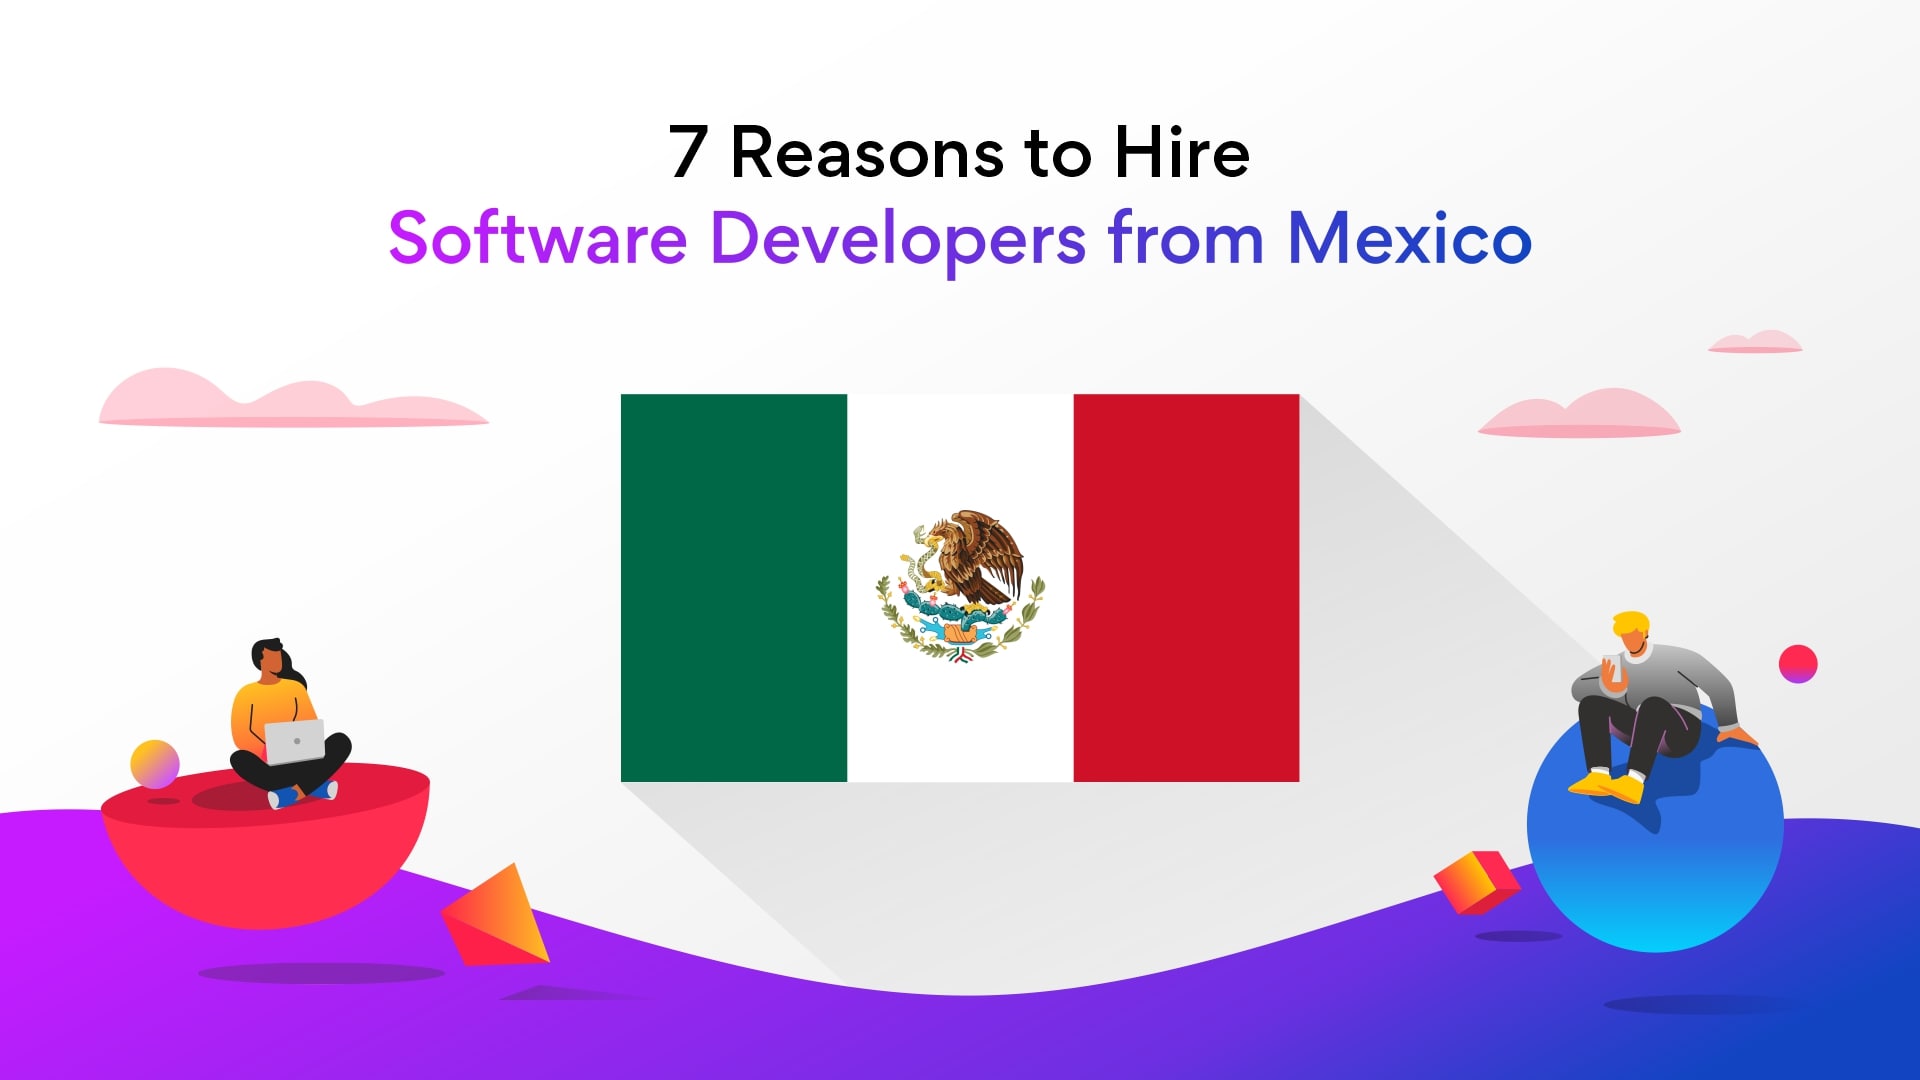 Hire Software Developers from Mexico